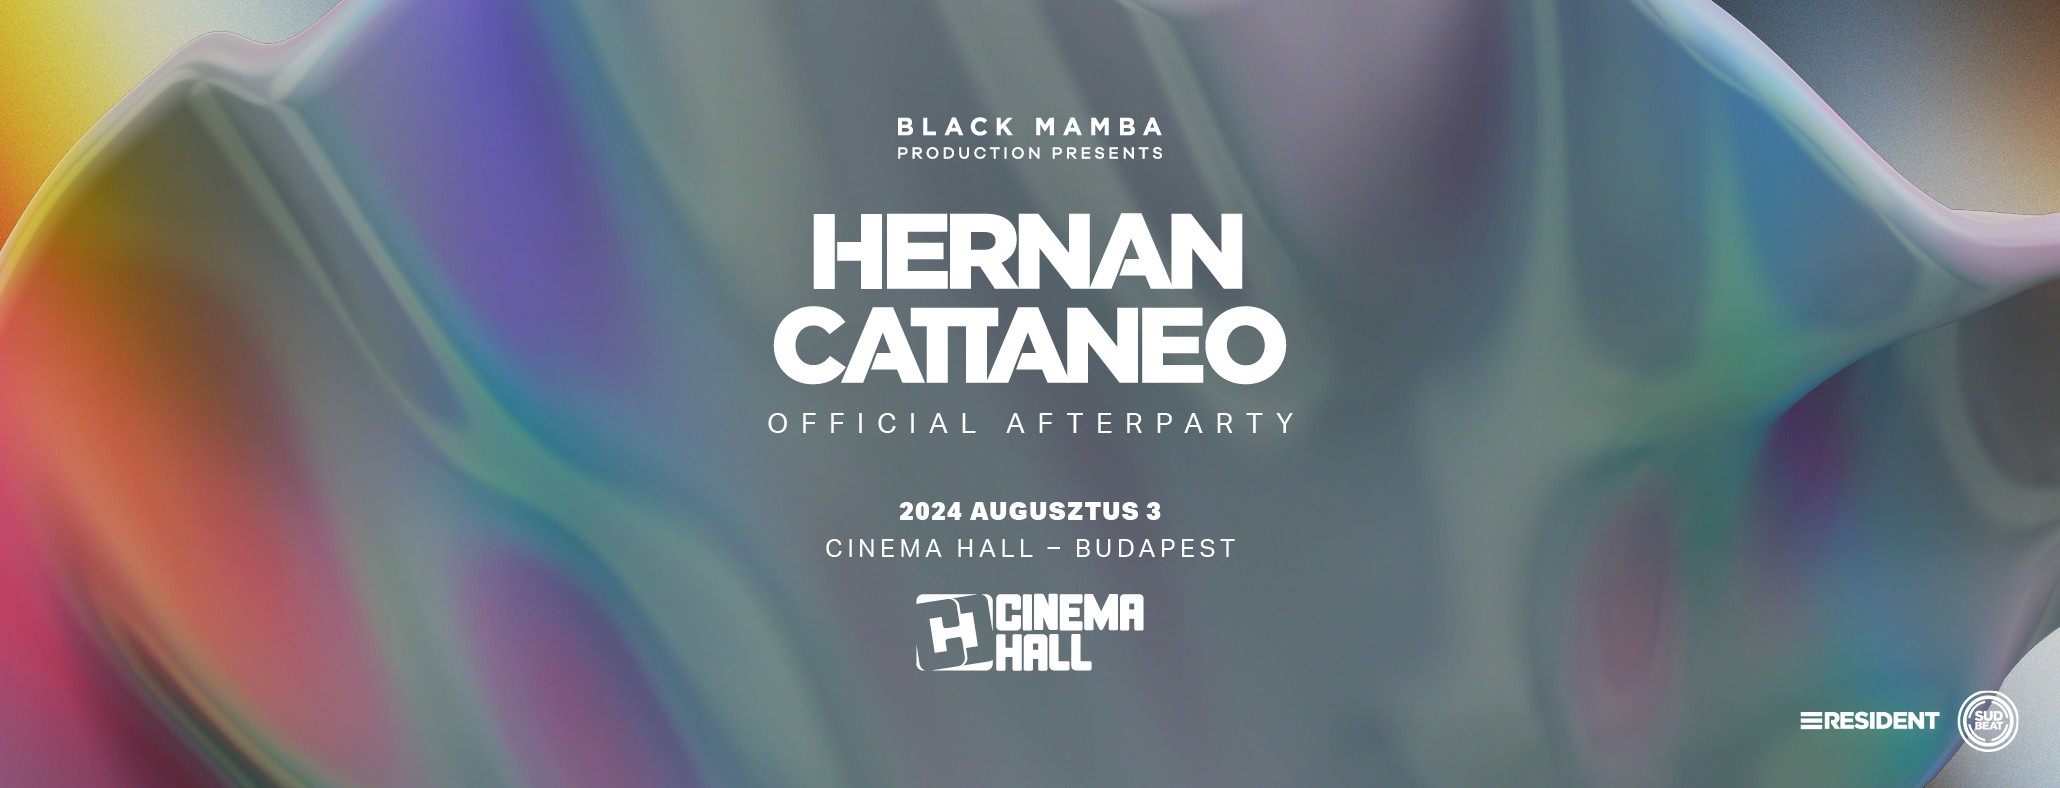 HERNAN CATTANEO OFFICIAL AFTERPARTY